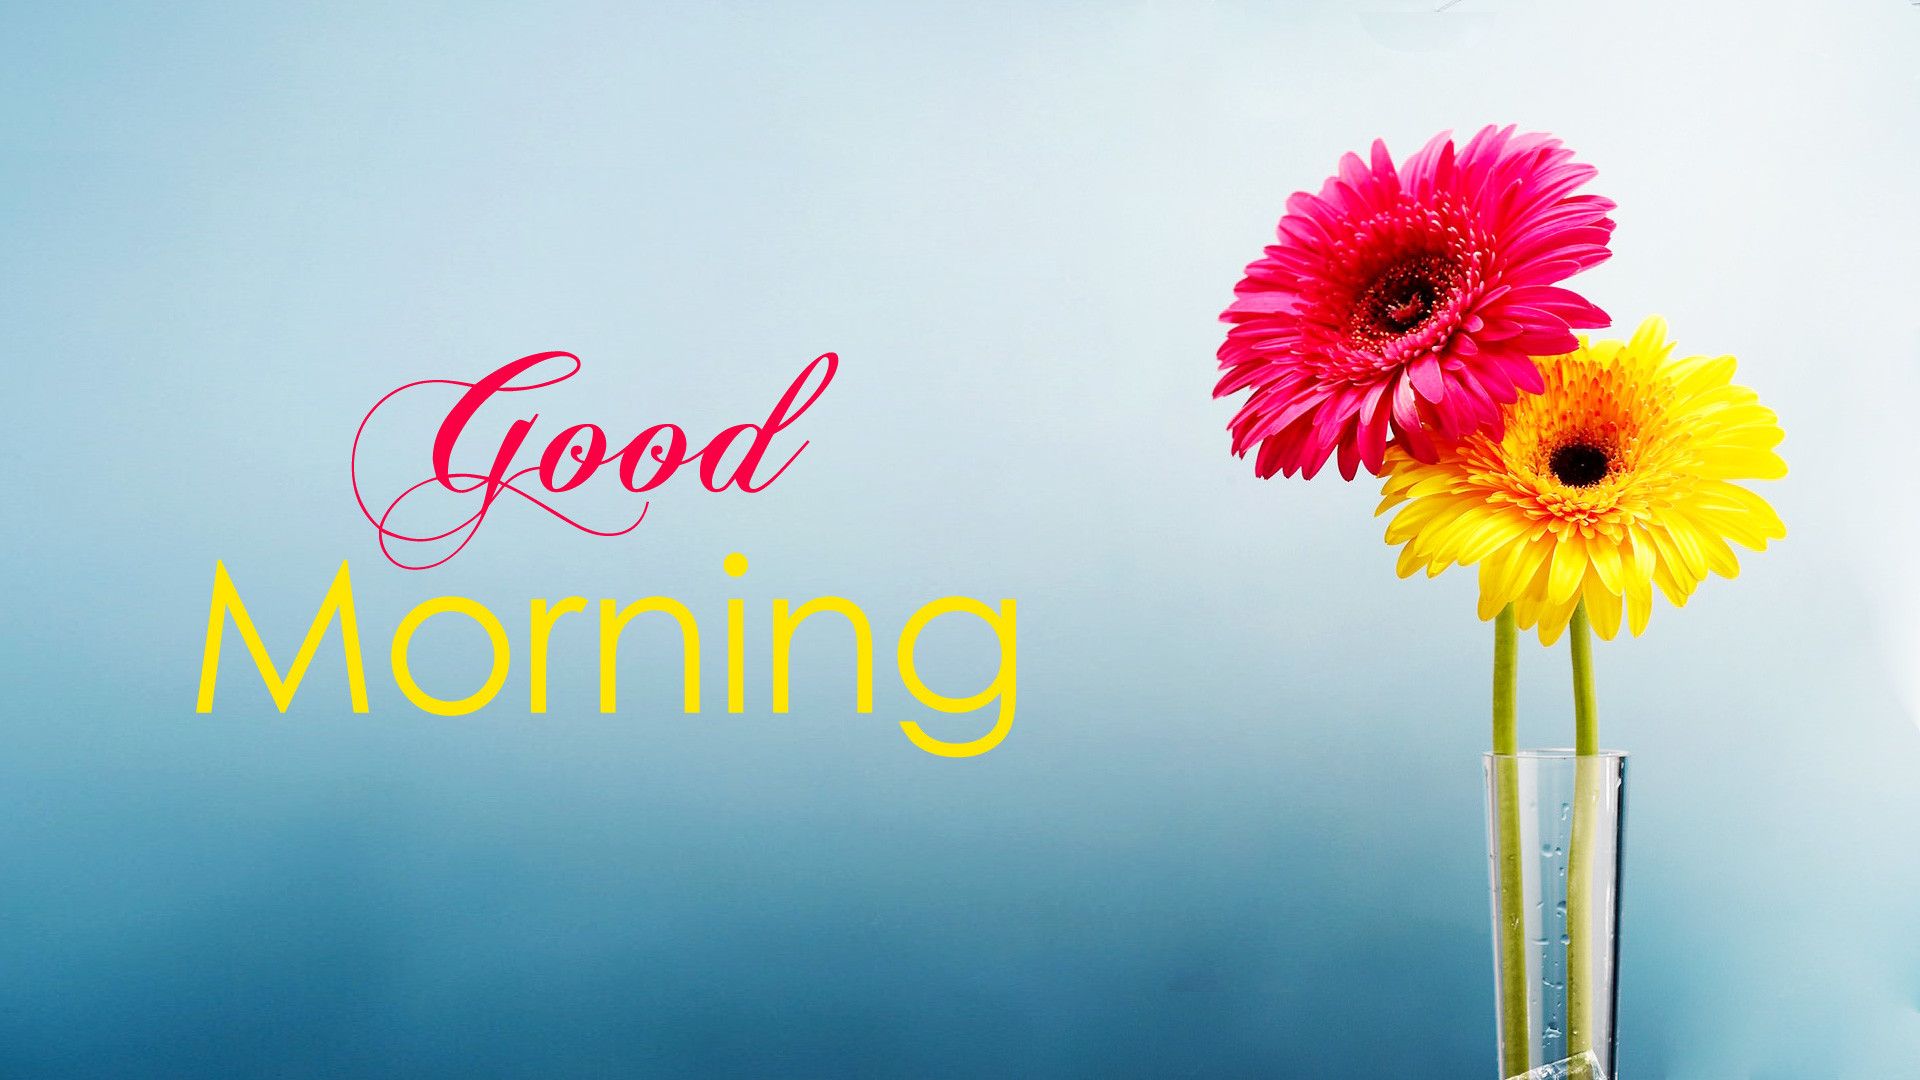 Good Morning Images HD 1080p Download